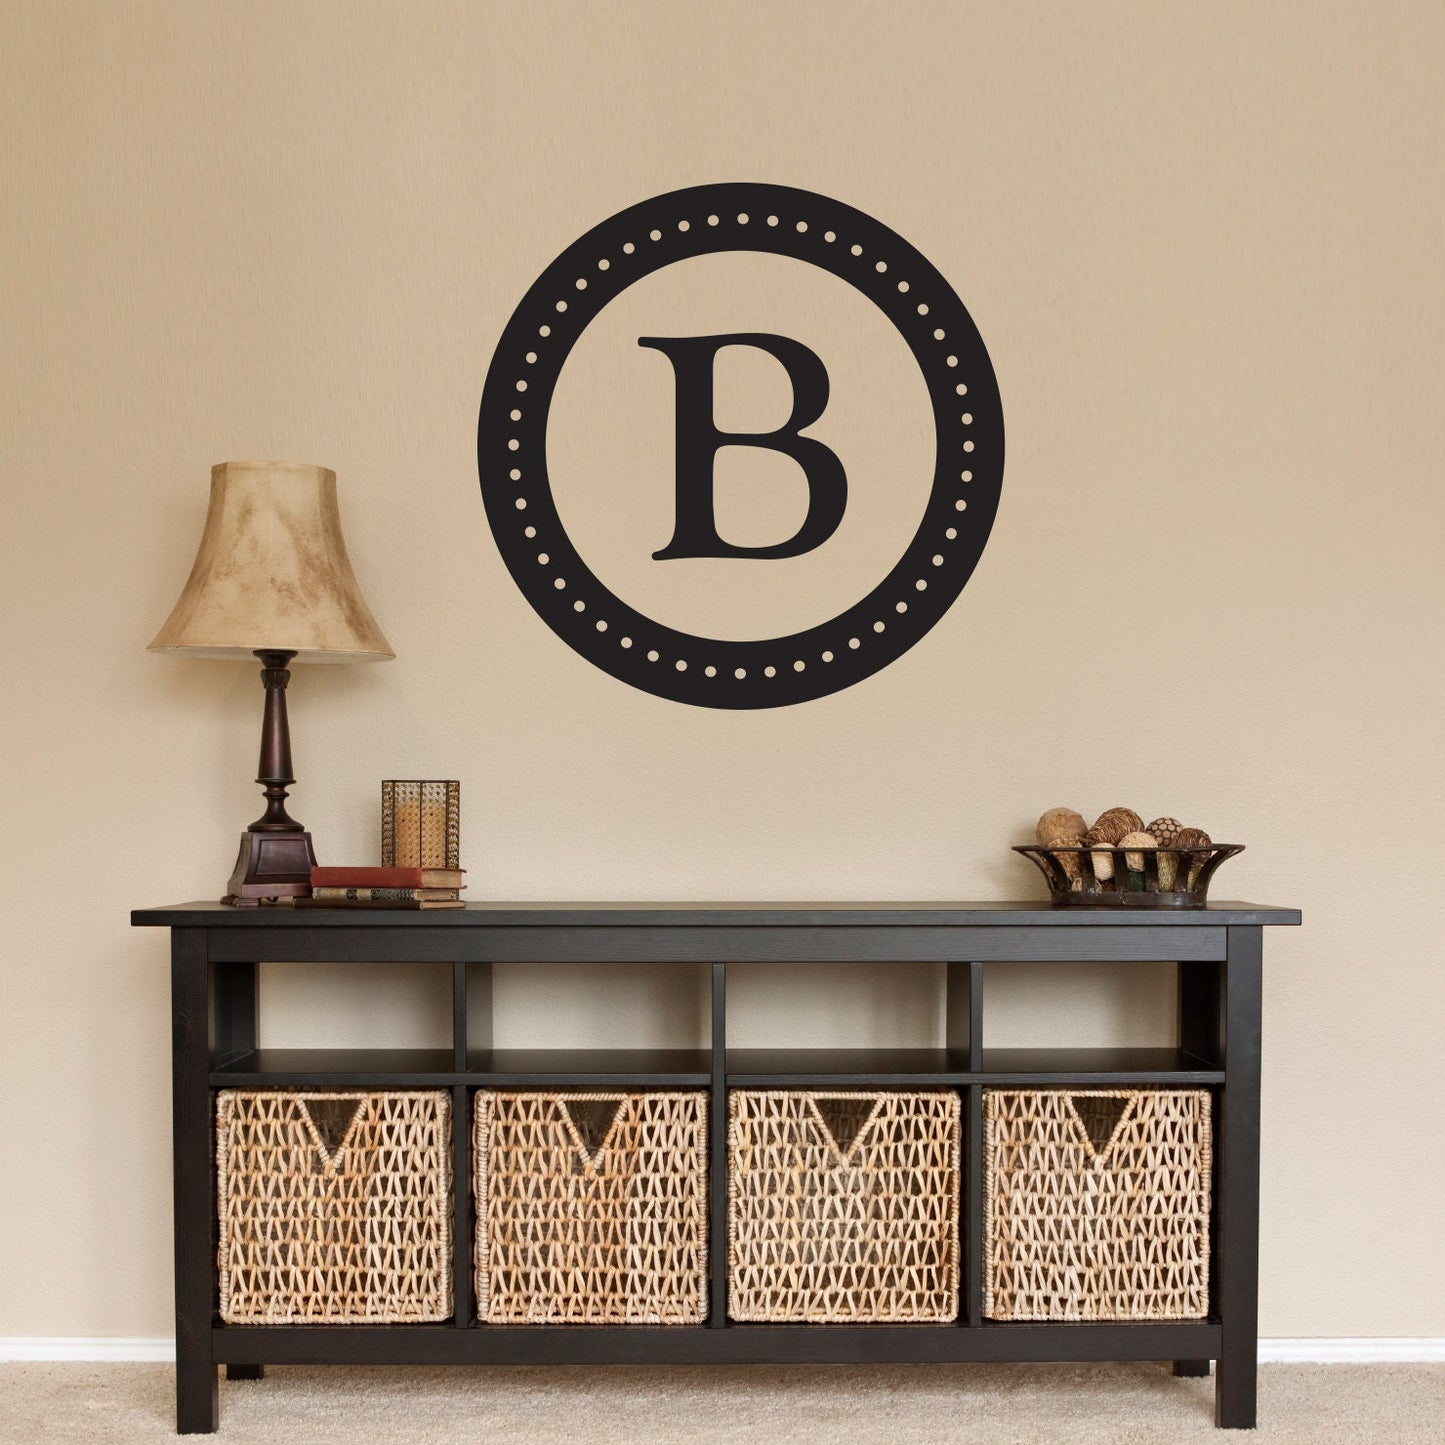 Personalized Initial Circle Wall Decal - Last Name Initial Decal - Large